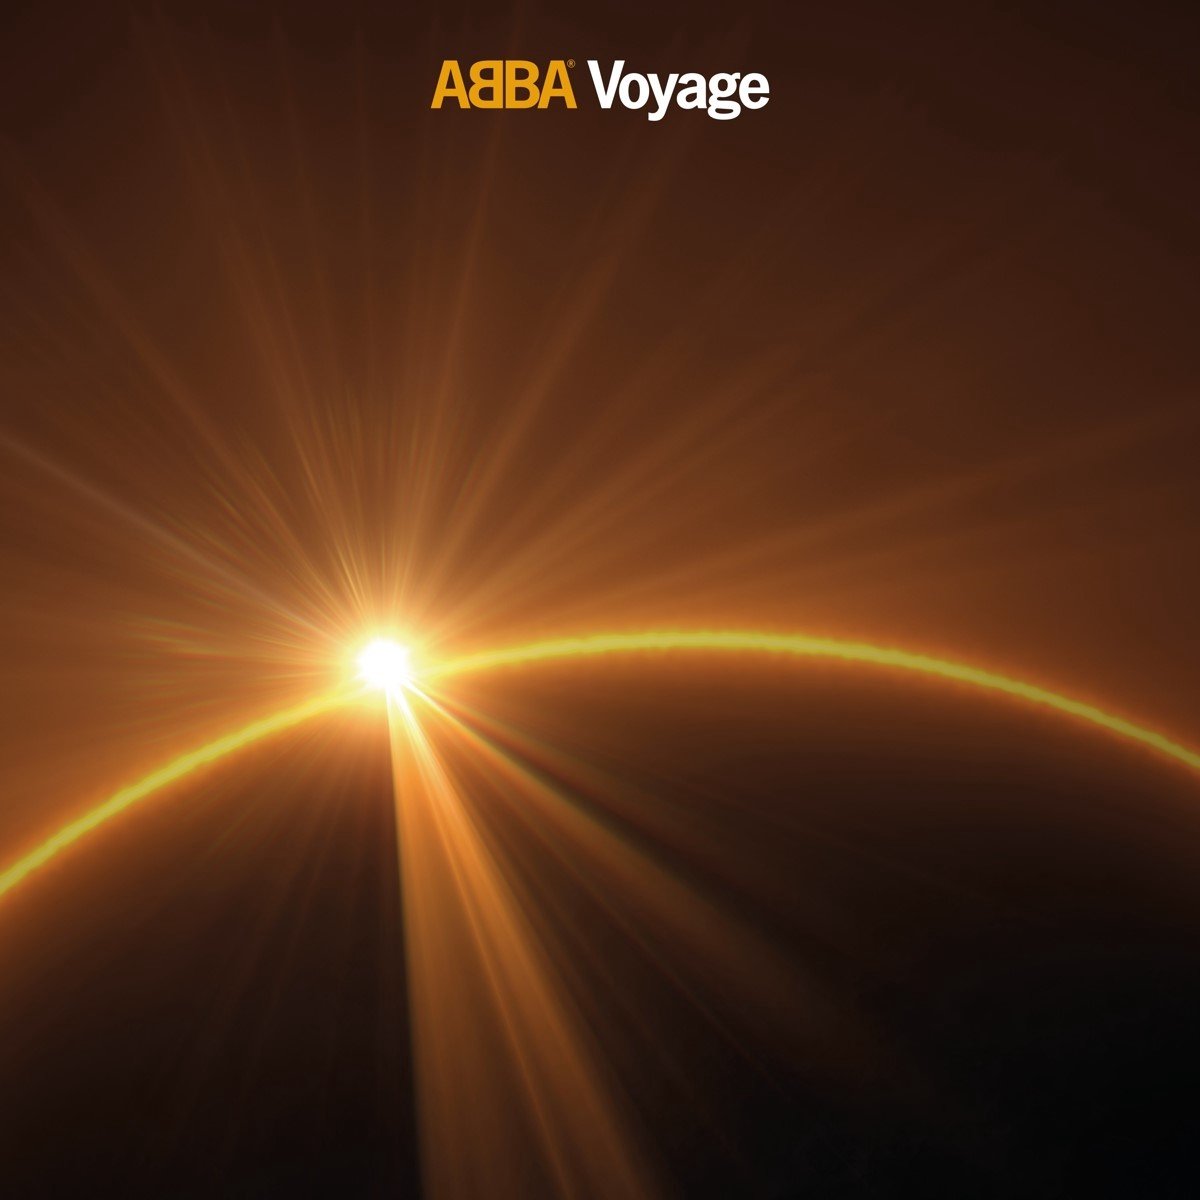 ABBA - Voyage (CD) (Limited Eco Edition) - ABBA